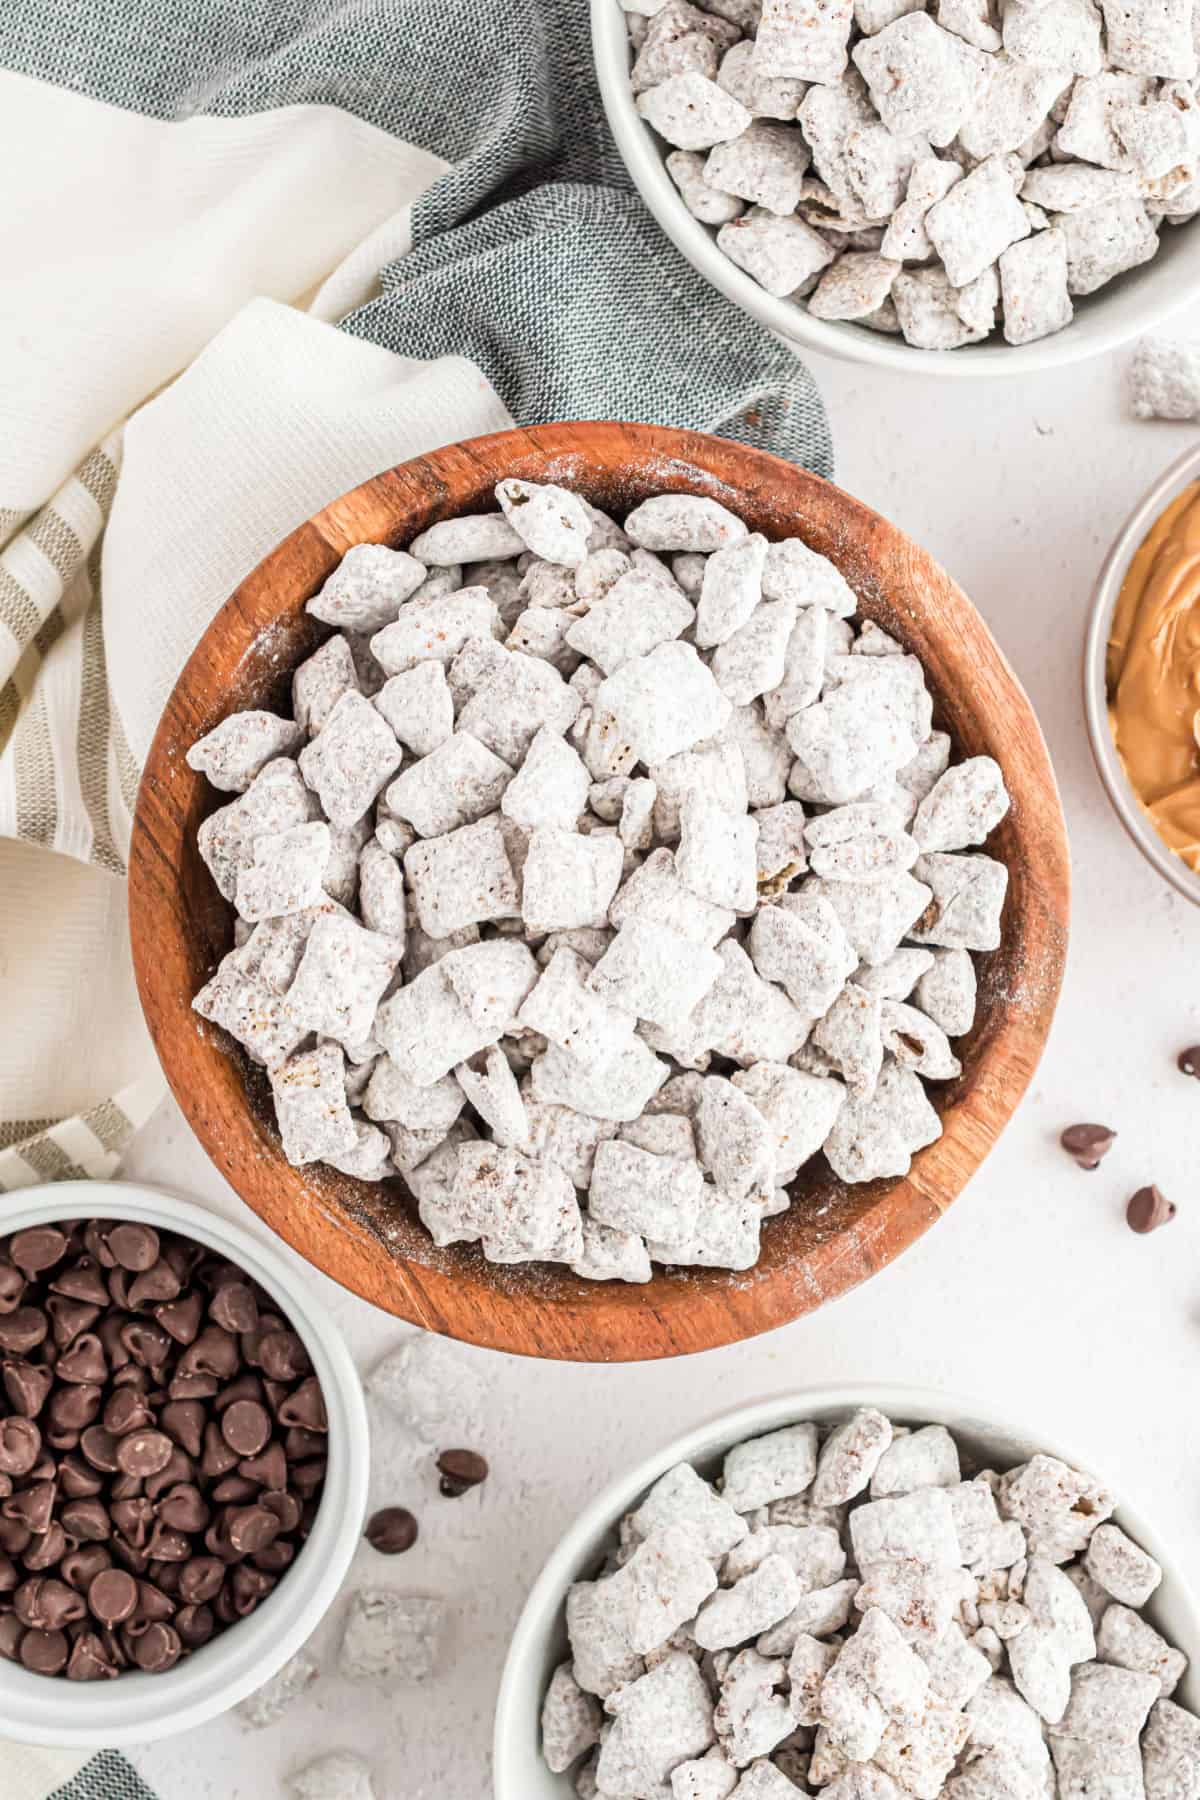 Wooden bowl filled with puppy chow.